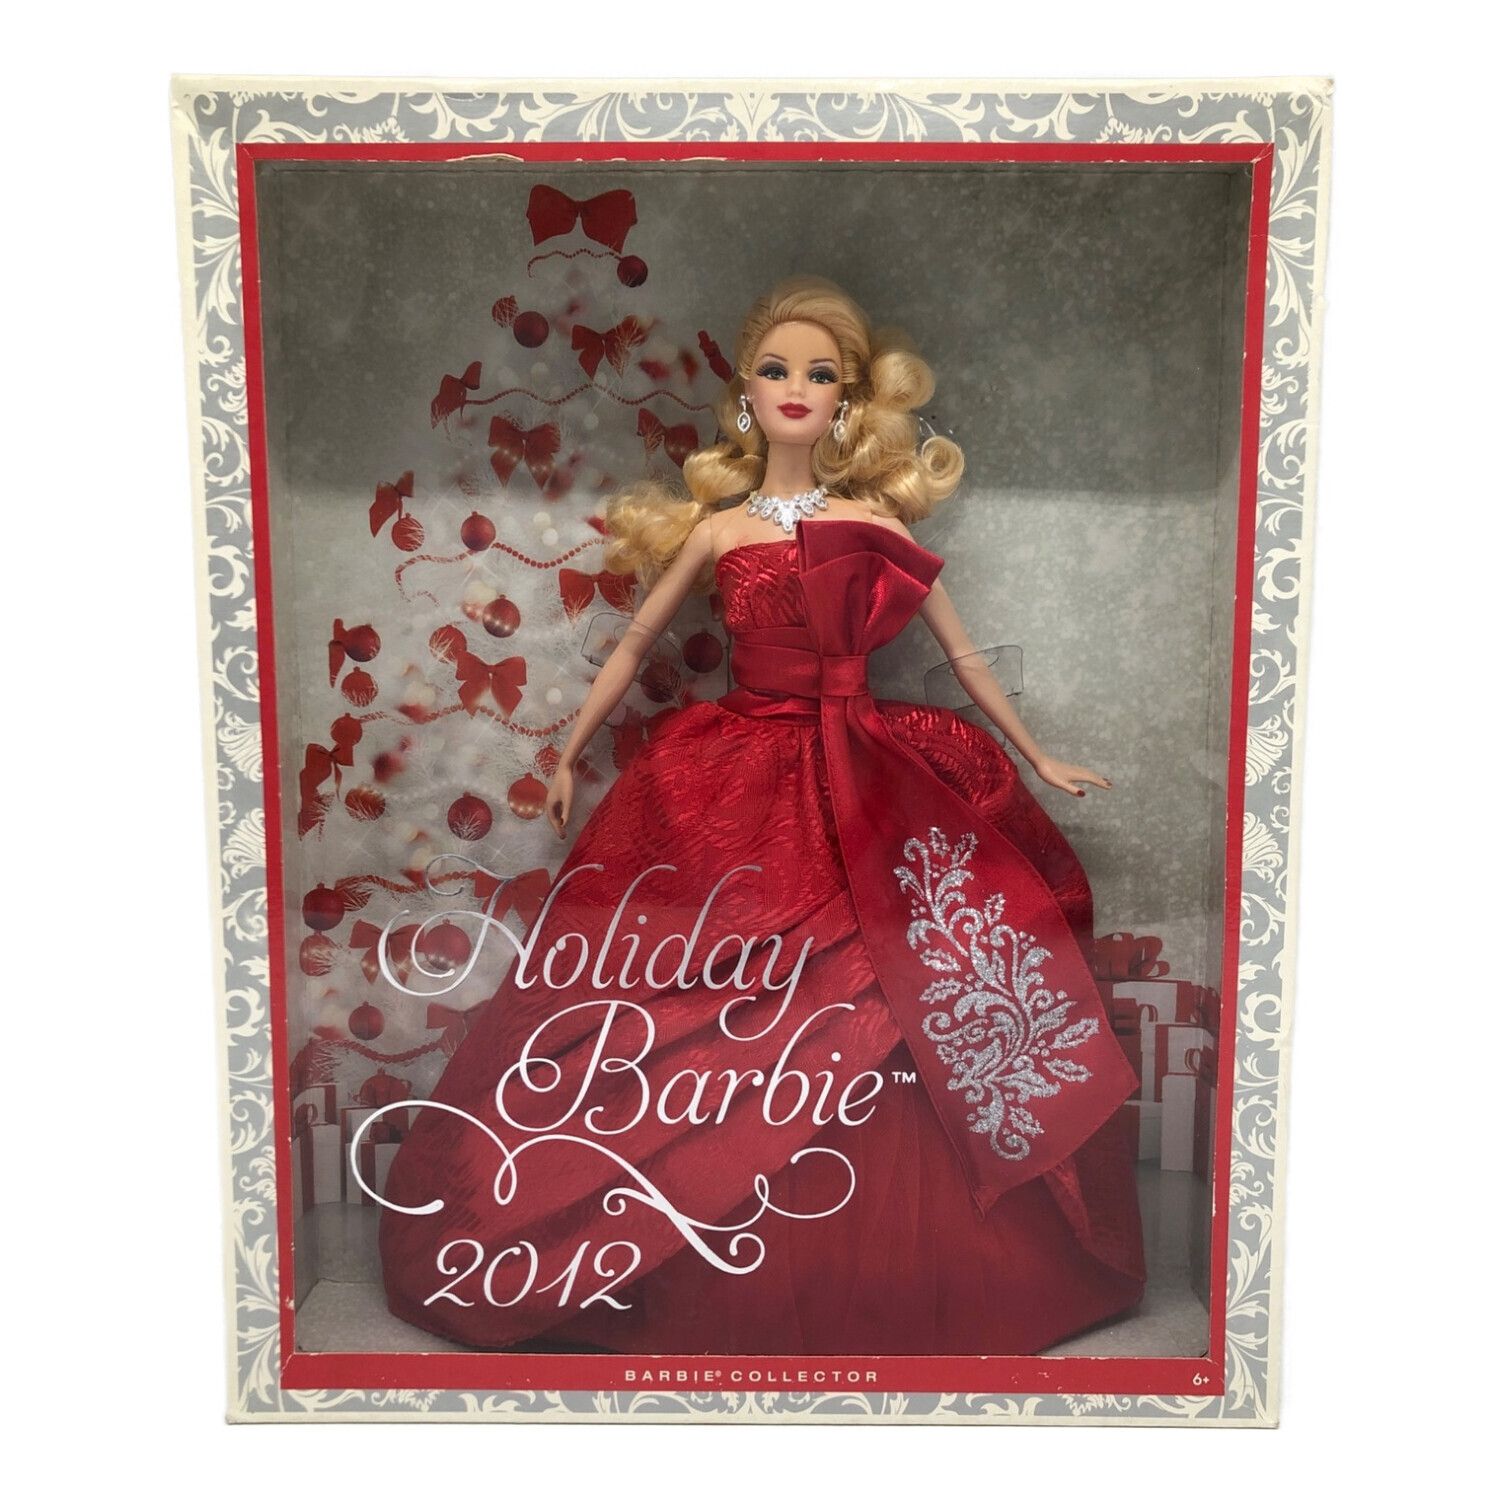 Barbie(バービー) Collector Doll Silver Label Hershey Chocolate